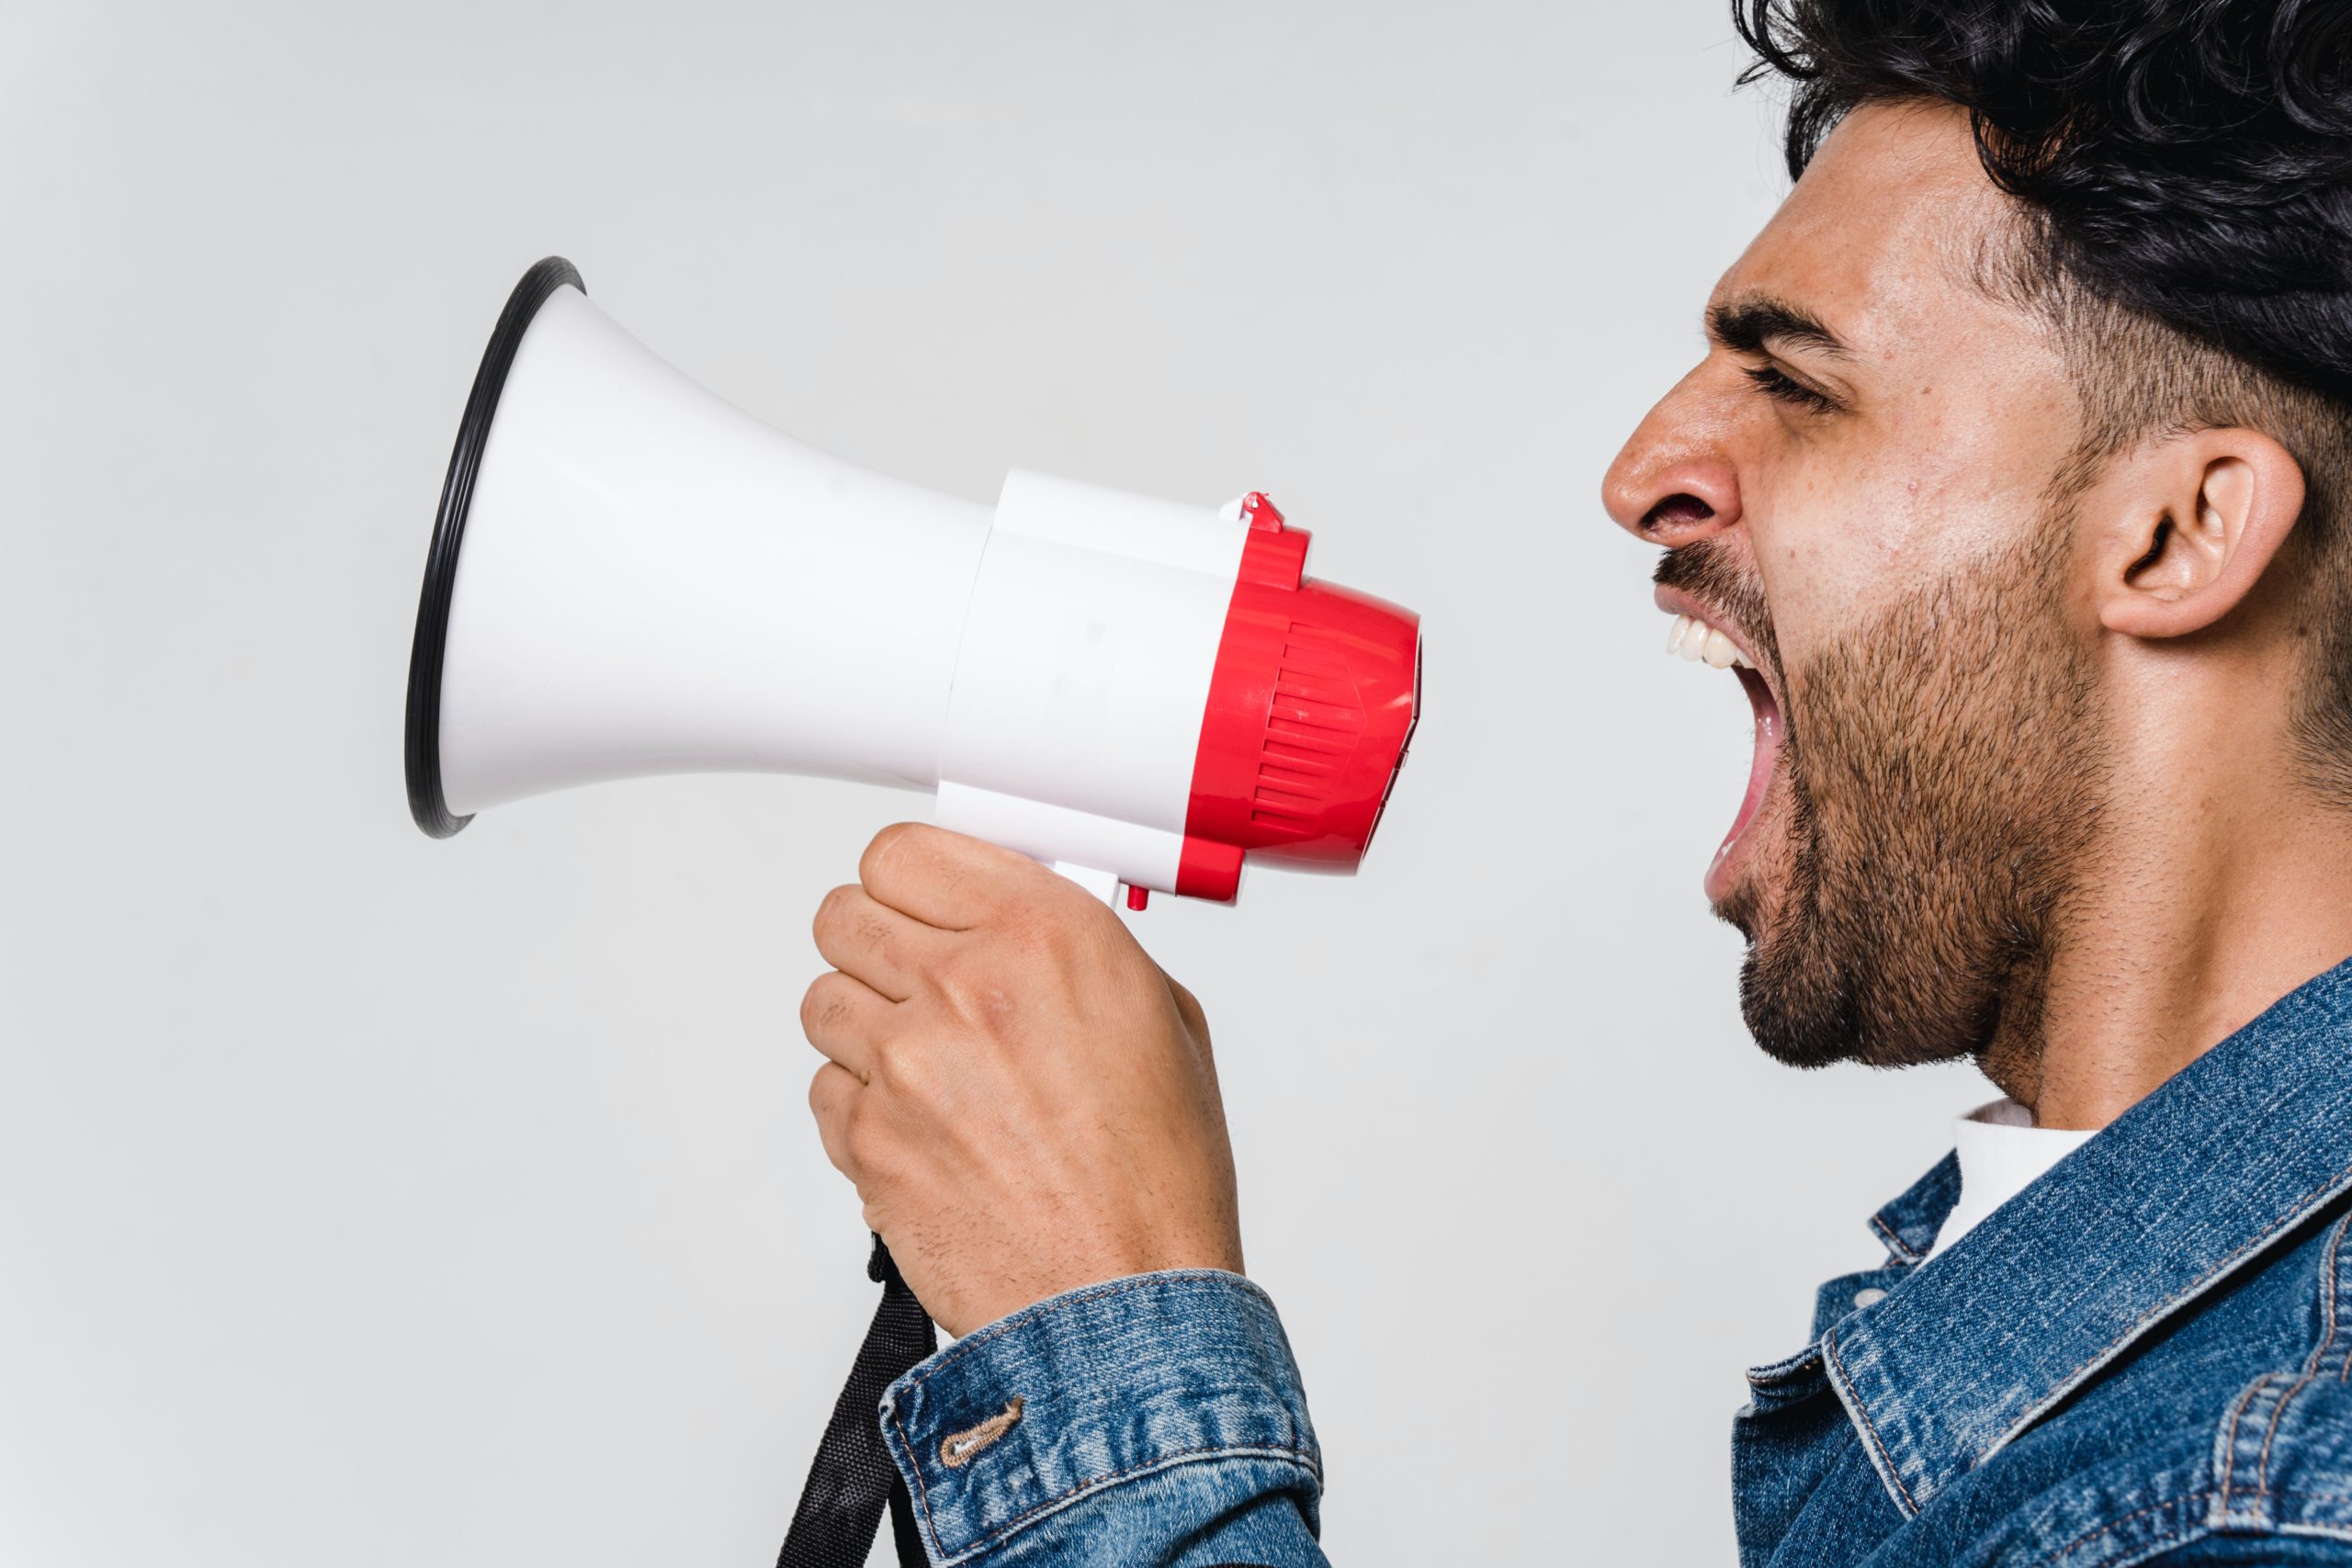 man yelling into a megaphone against a white background